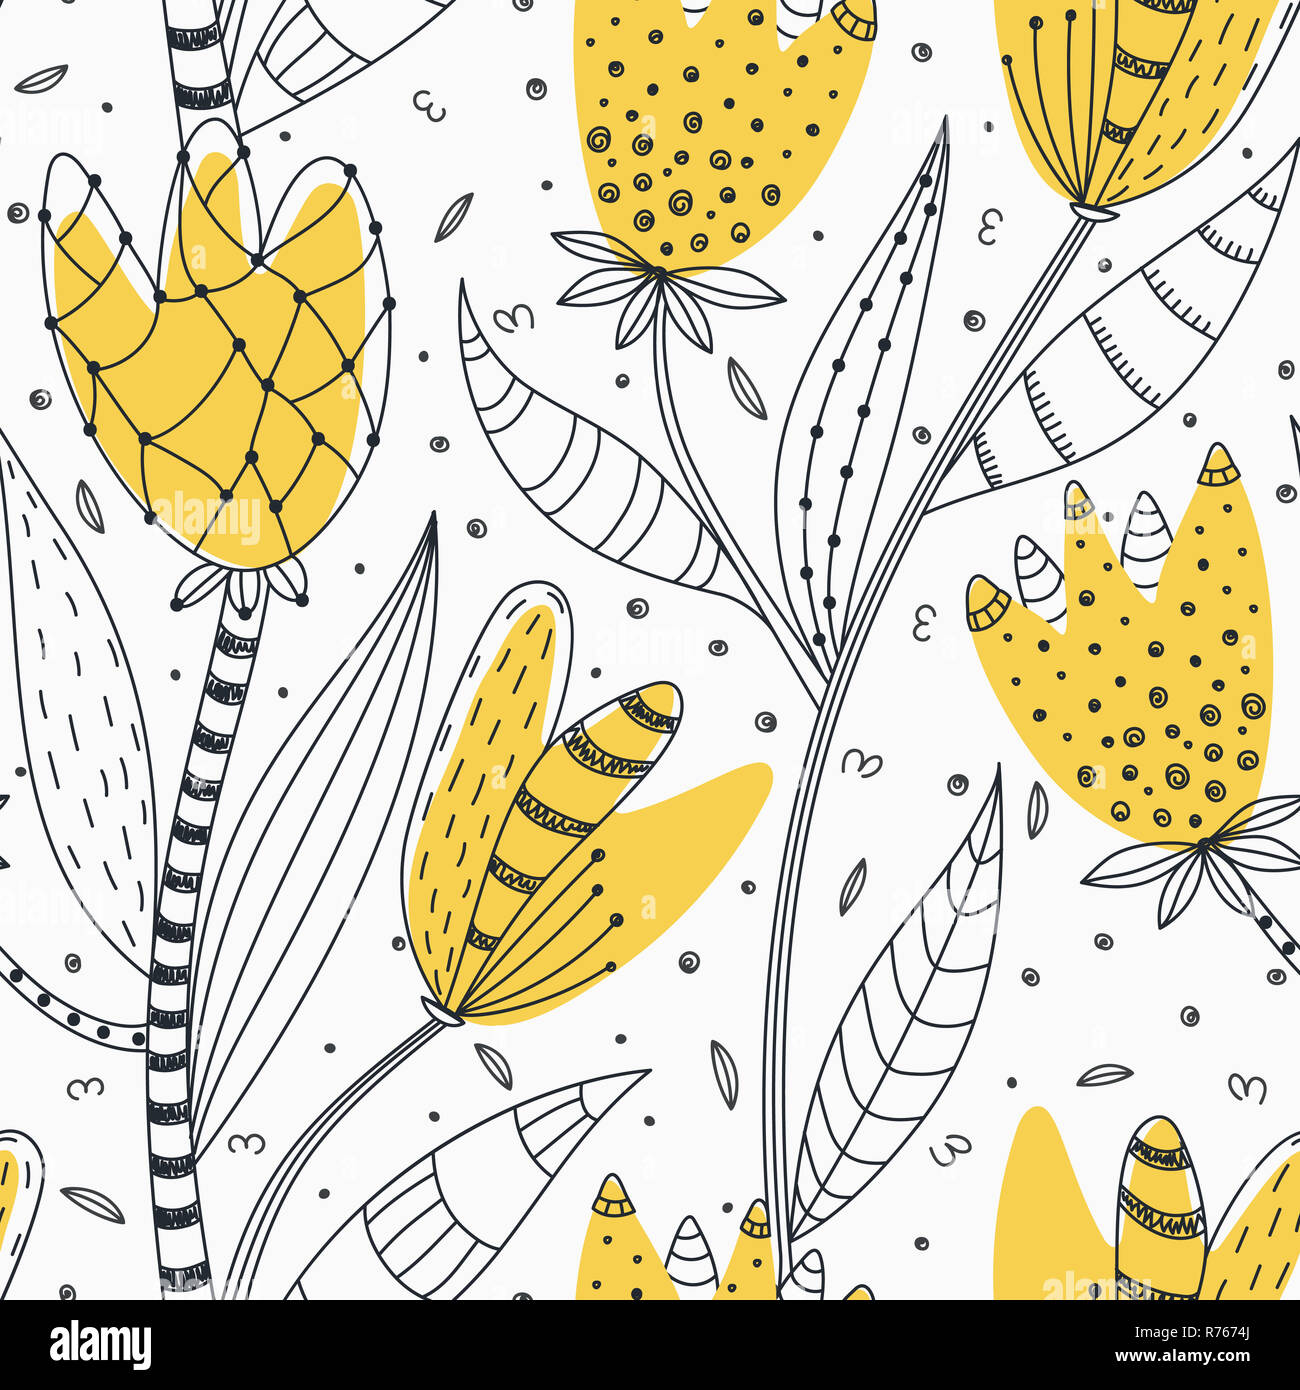 Floral seamless pattern. Hand drawn creative abstract flowers with doodle decoration. Colorful artistic design. It can be used for wallpaper, textiles, wrapping, card Stock Photo